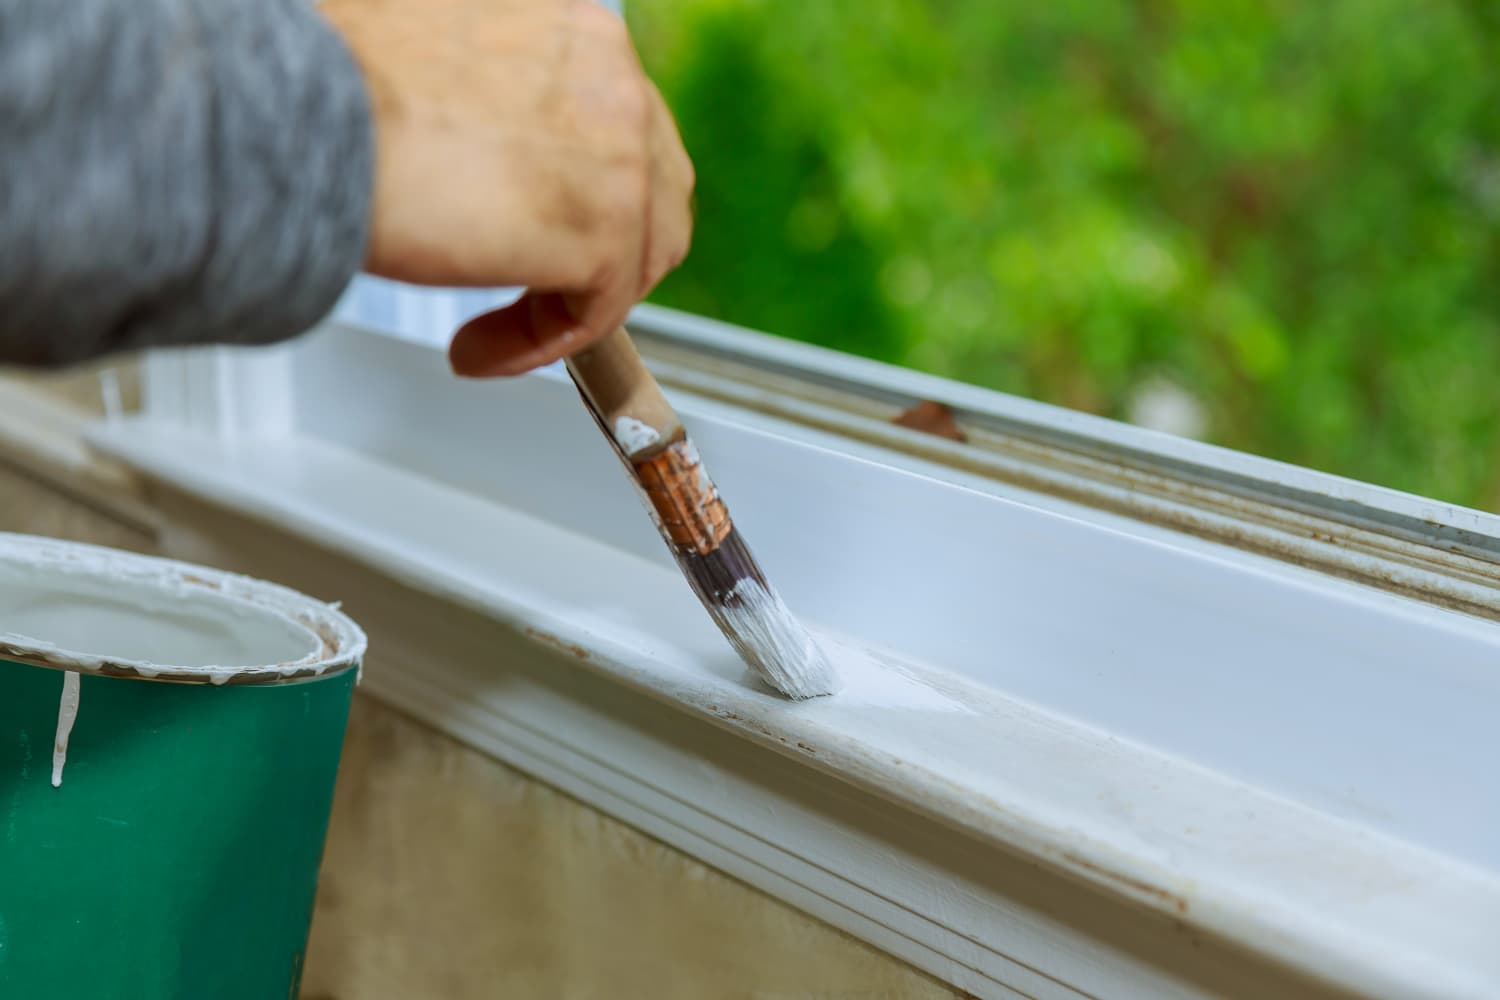 Should You Paint That Trim or Leave It Natural? Here’s What 4 Real Estate Agents Say